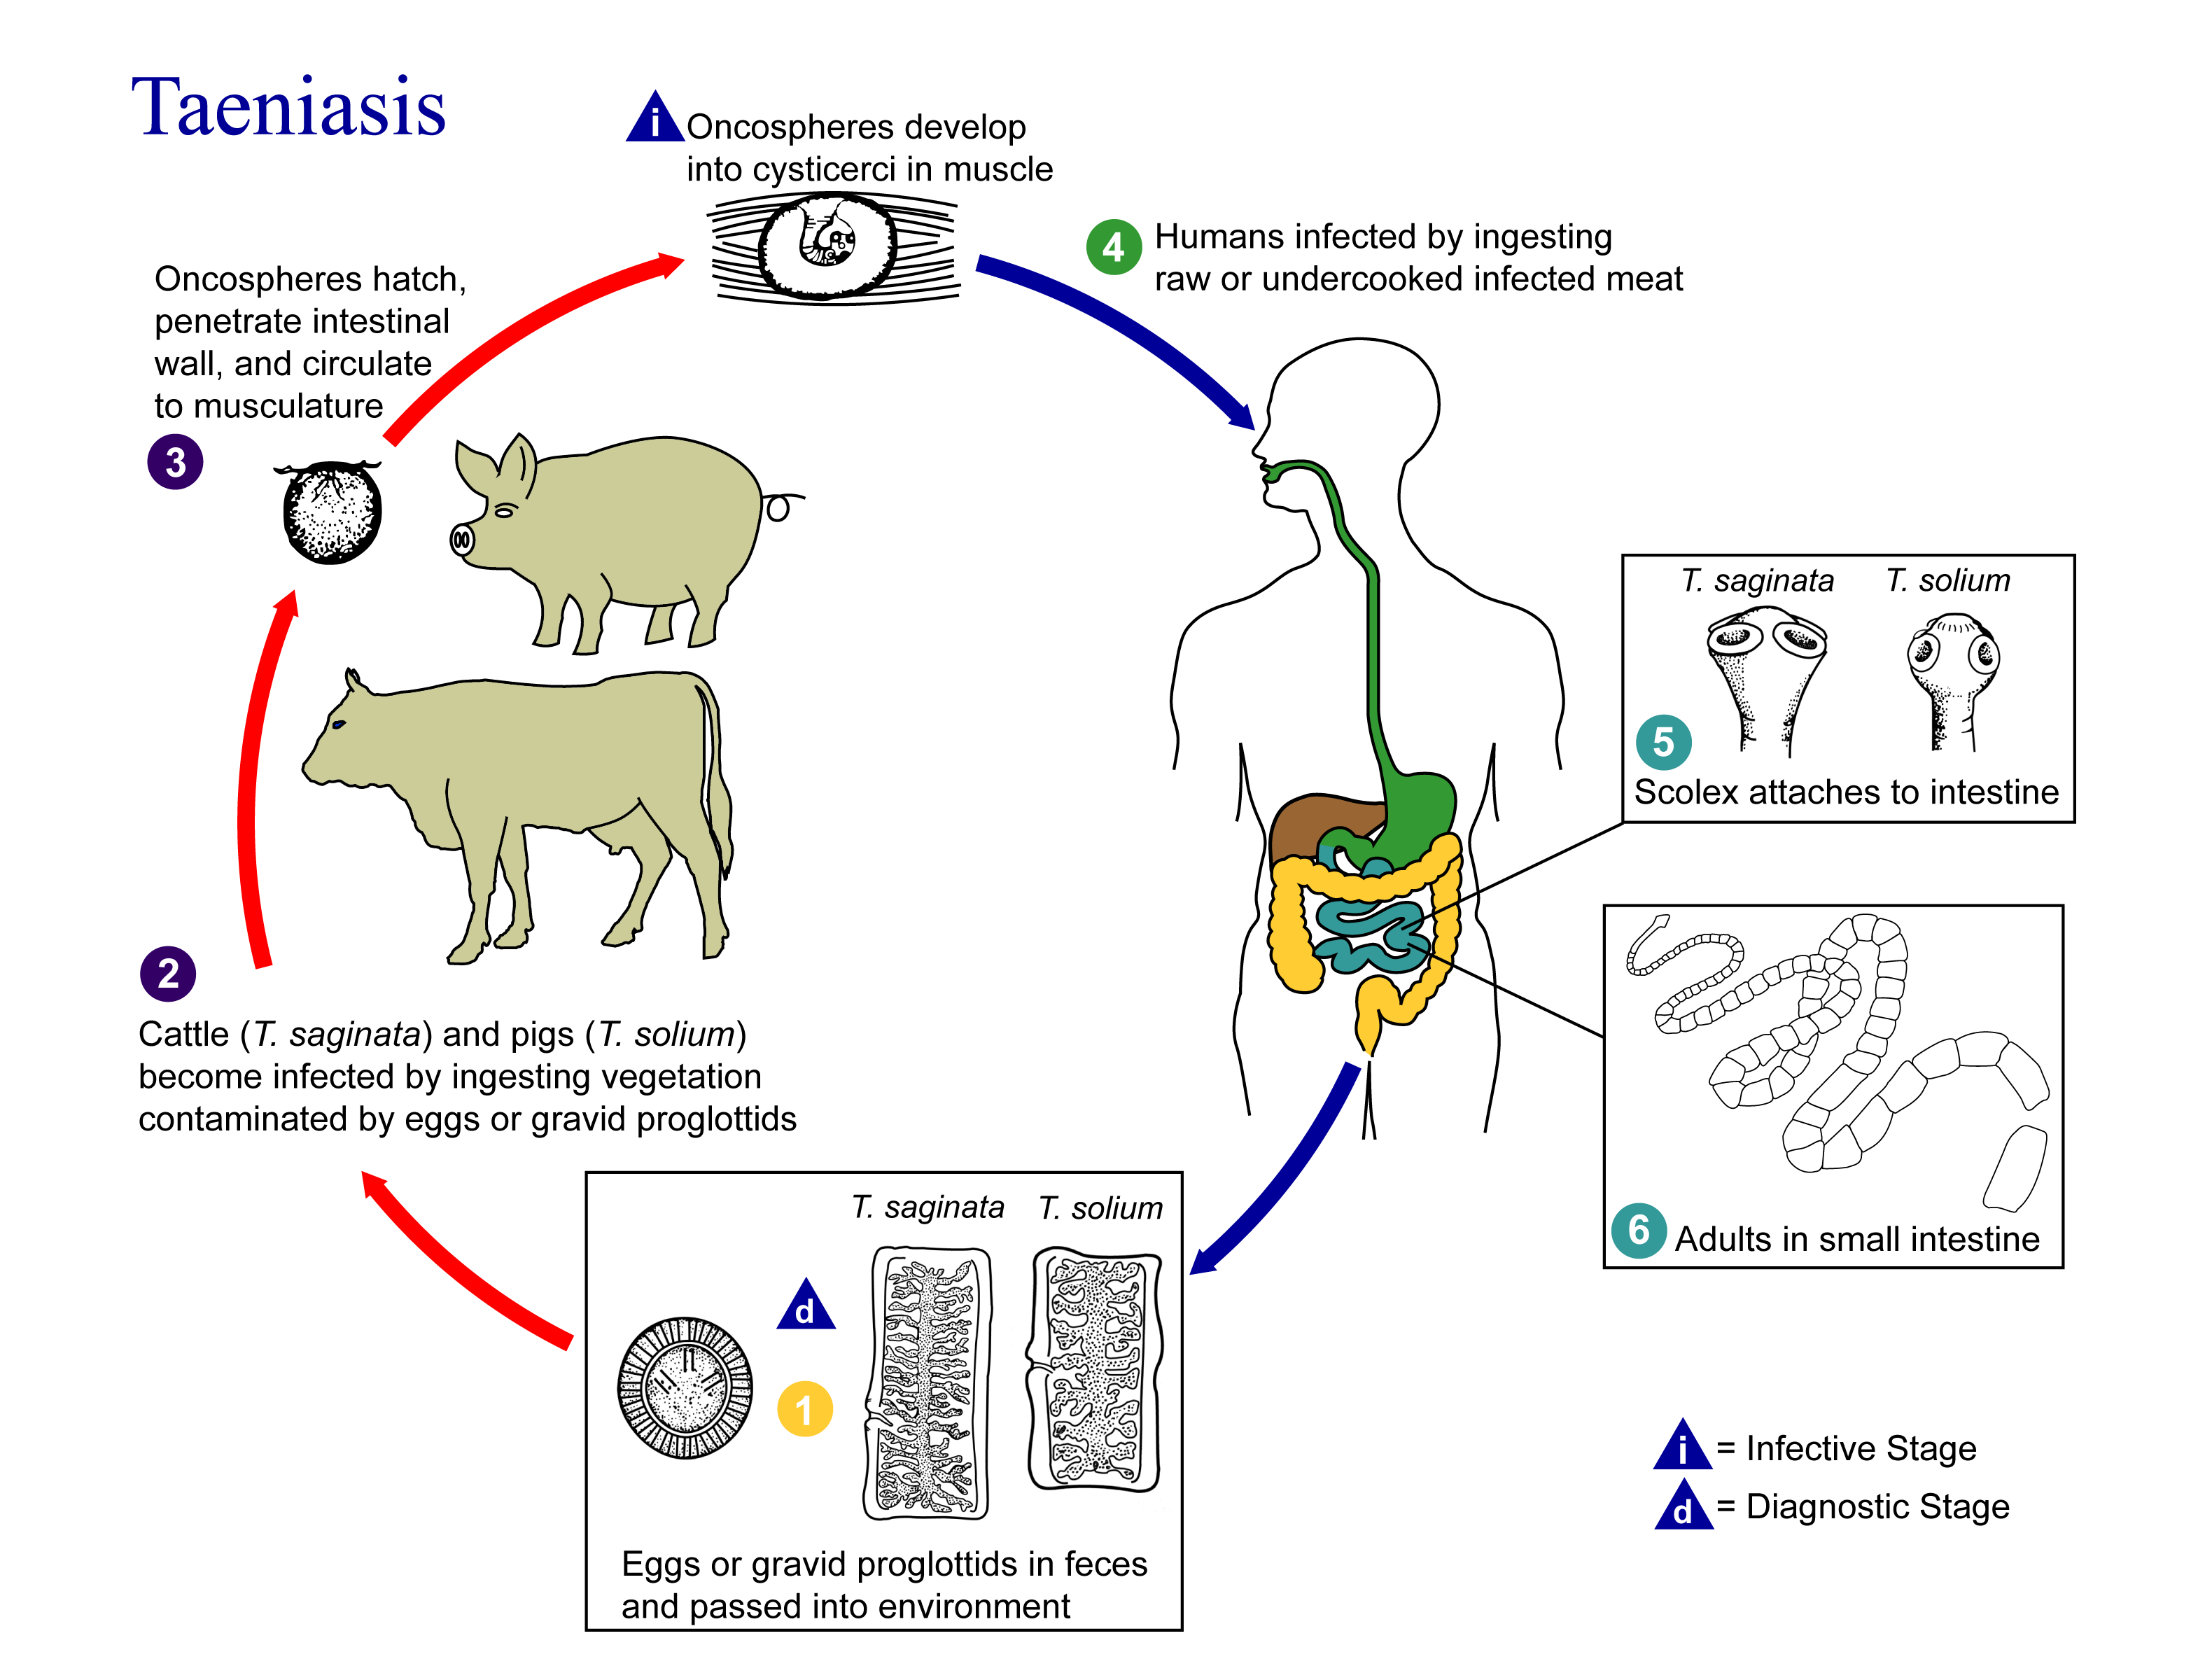 Life cycle of the cestode Taenia: Taeniasis is the infection of humans with the adult tapeworm of Taenia saginata or Taenia solium. Humans are the only definitive hosts for T. saginata and T. solium. Eggs or gravid proglottids are passed with feces (1); the eggs can survive for days to months in the environment. Cattle (T. saginata) and pigs (T. solium) become infected by ingesting vegetation contaminated with eggs or gravid proglottids (2). In the animal’s intestine, the oncospheres hatch (3), invade the intestinal wall, and migrate to the striated muscles, where they develop into cysticerci. A cysticercus can survive for several years in the animal. Humans become infected by ingesting raw or undercooked infected meat (4). In the human intestine, the cysticercus develops over 2 months into an adult tapeworm, which can survive for years. The adult tapeworms attach to the small intestine by their scolex (5) and reside in the small intestine (6). Length of adult worms is usually 5 m or less for T. saginata (however it may reach up to 25 m) and 2 to 7 m for T. solium. The adults produce proglottids which mature, become gravid, detach from the tapeworm, and migrate to the anus or are passed in the stool (approximately 6 per day). T. saginata adults usually have 1,000 to 2,000 proglottids, while T. solium adults have an average of 1,000 proglottids. The eggs contained in the gravid proglottids are released after the proglottids are passed with the feces. T. saginata may produce up to 100,000 and T. solium may produce 50,000 eggs per proglottid respectively.